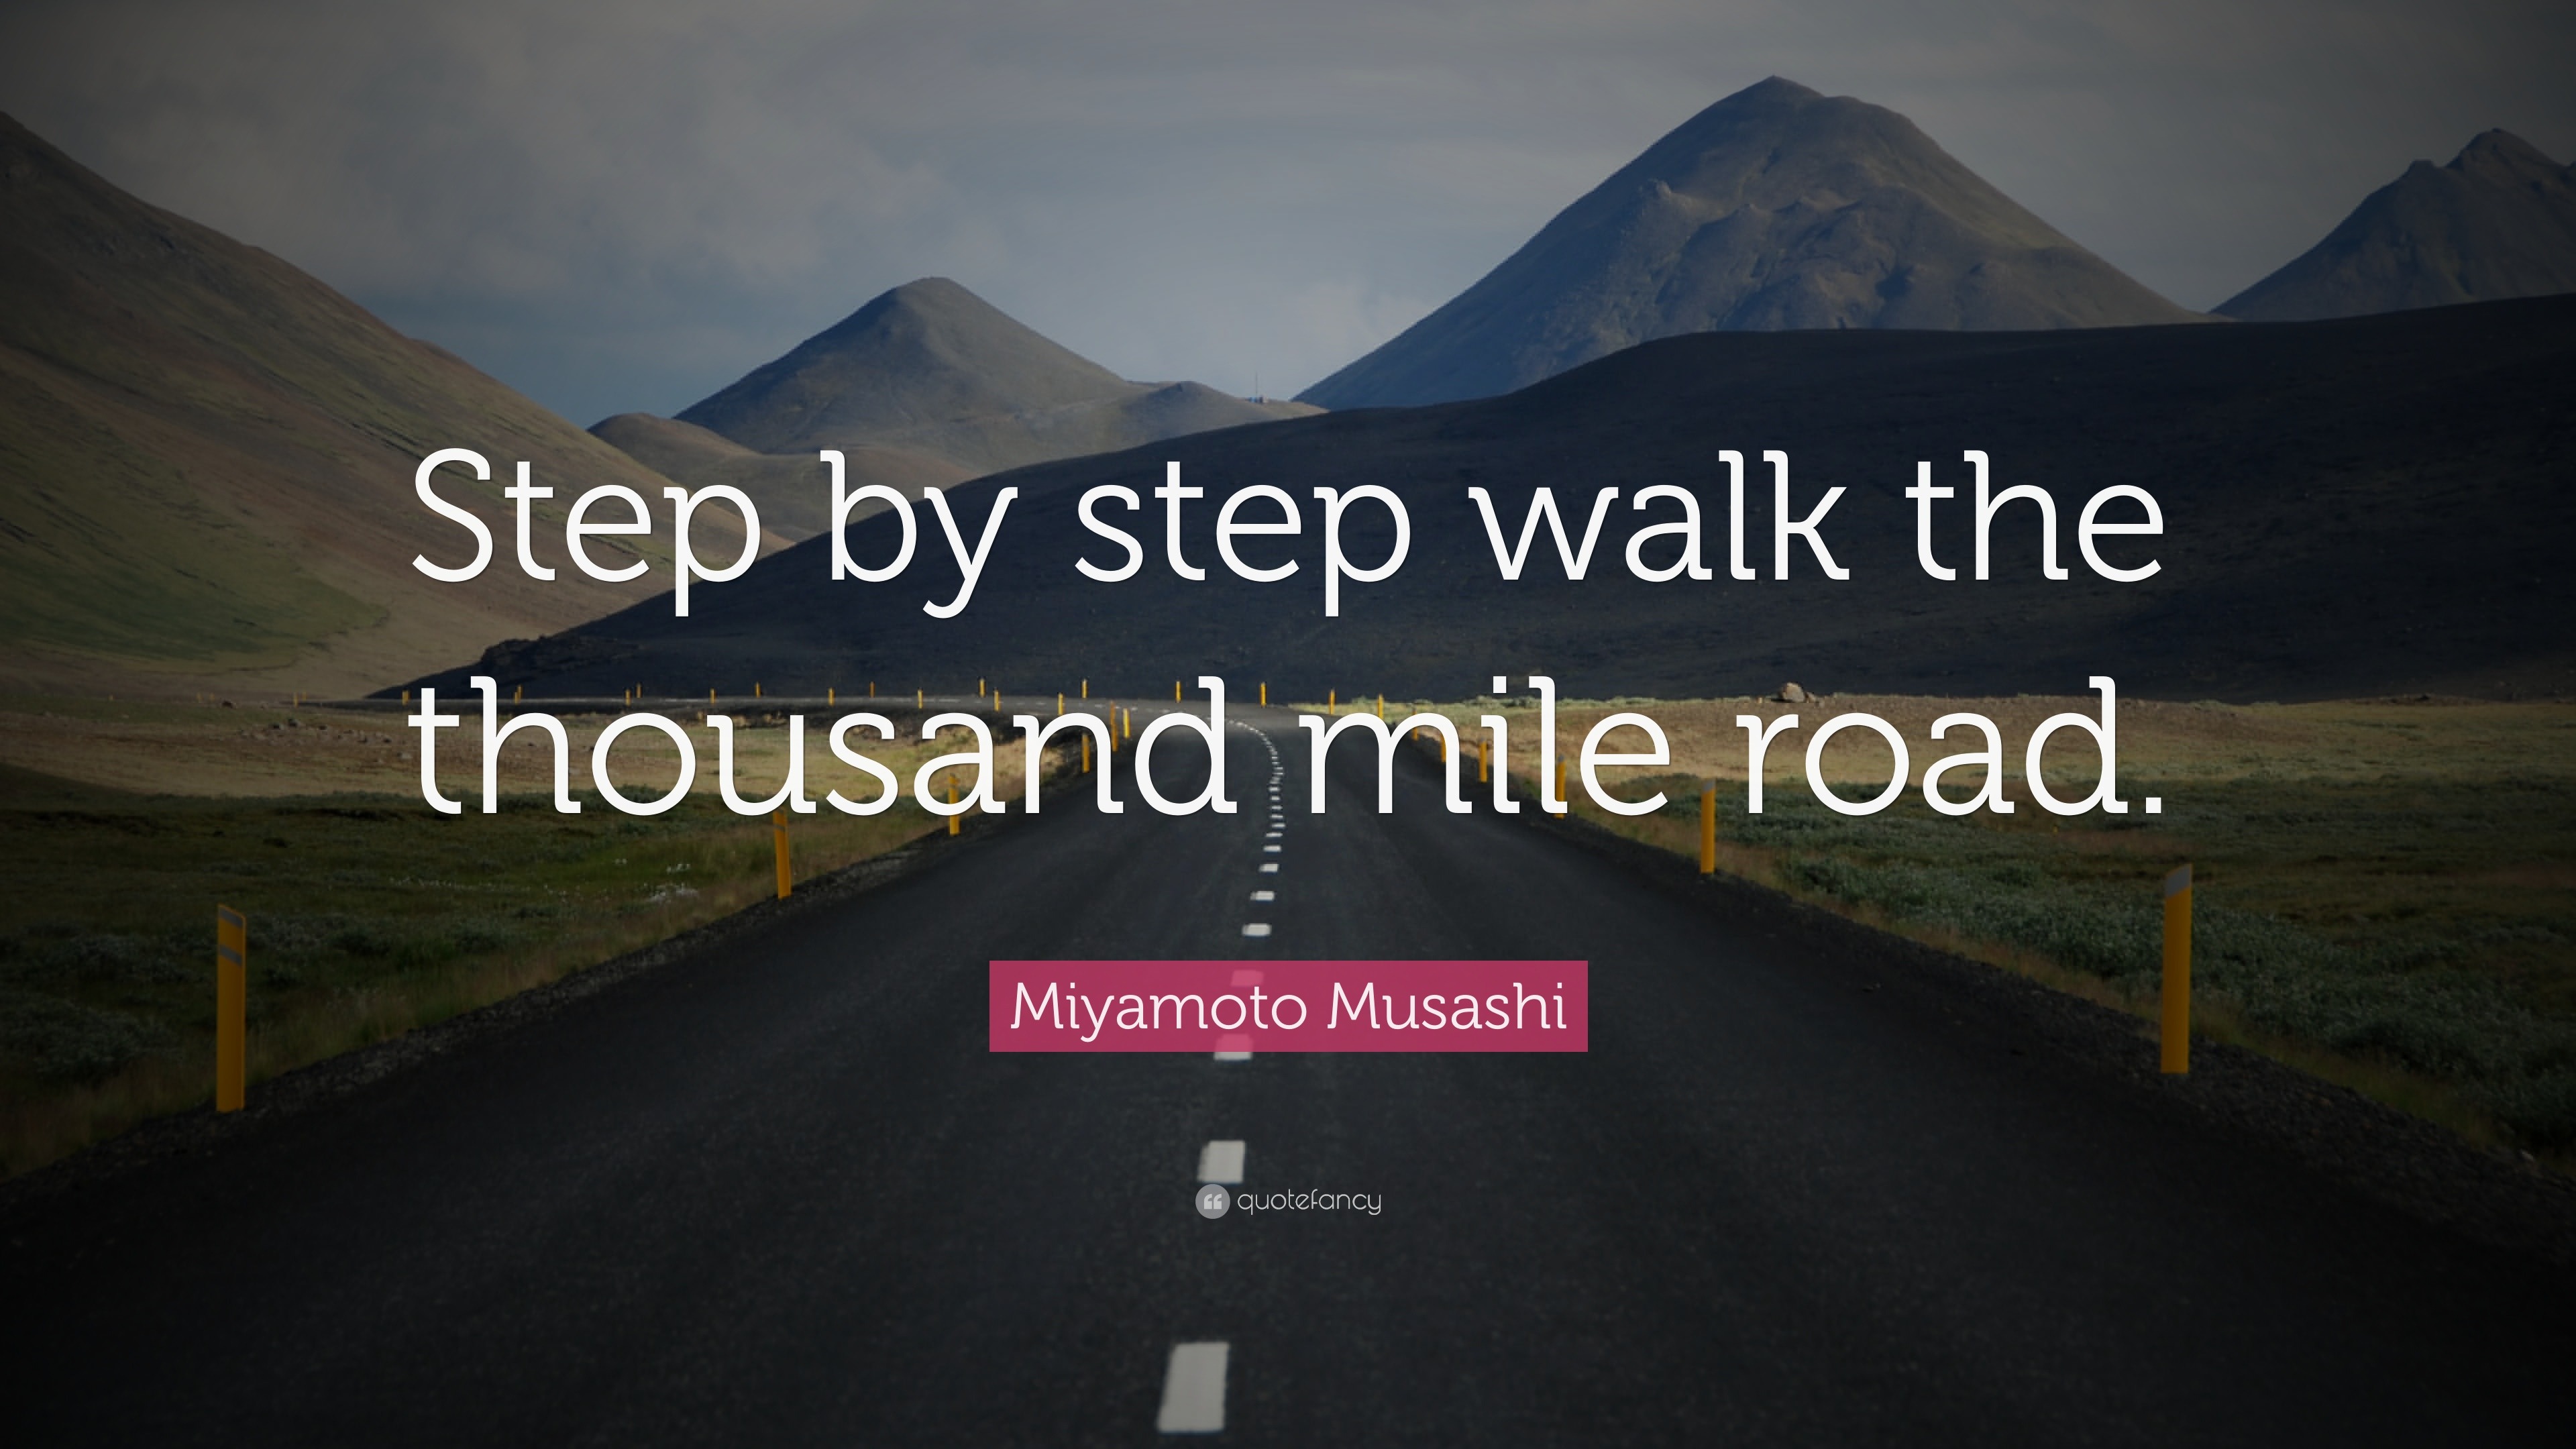 How many walking steps are in a mile?